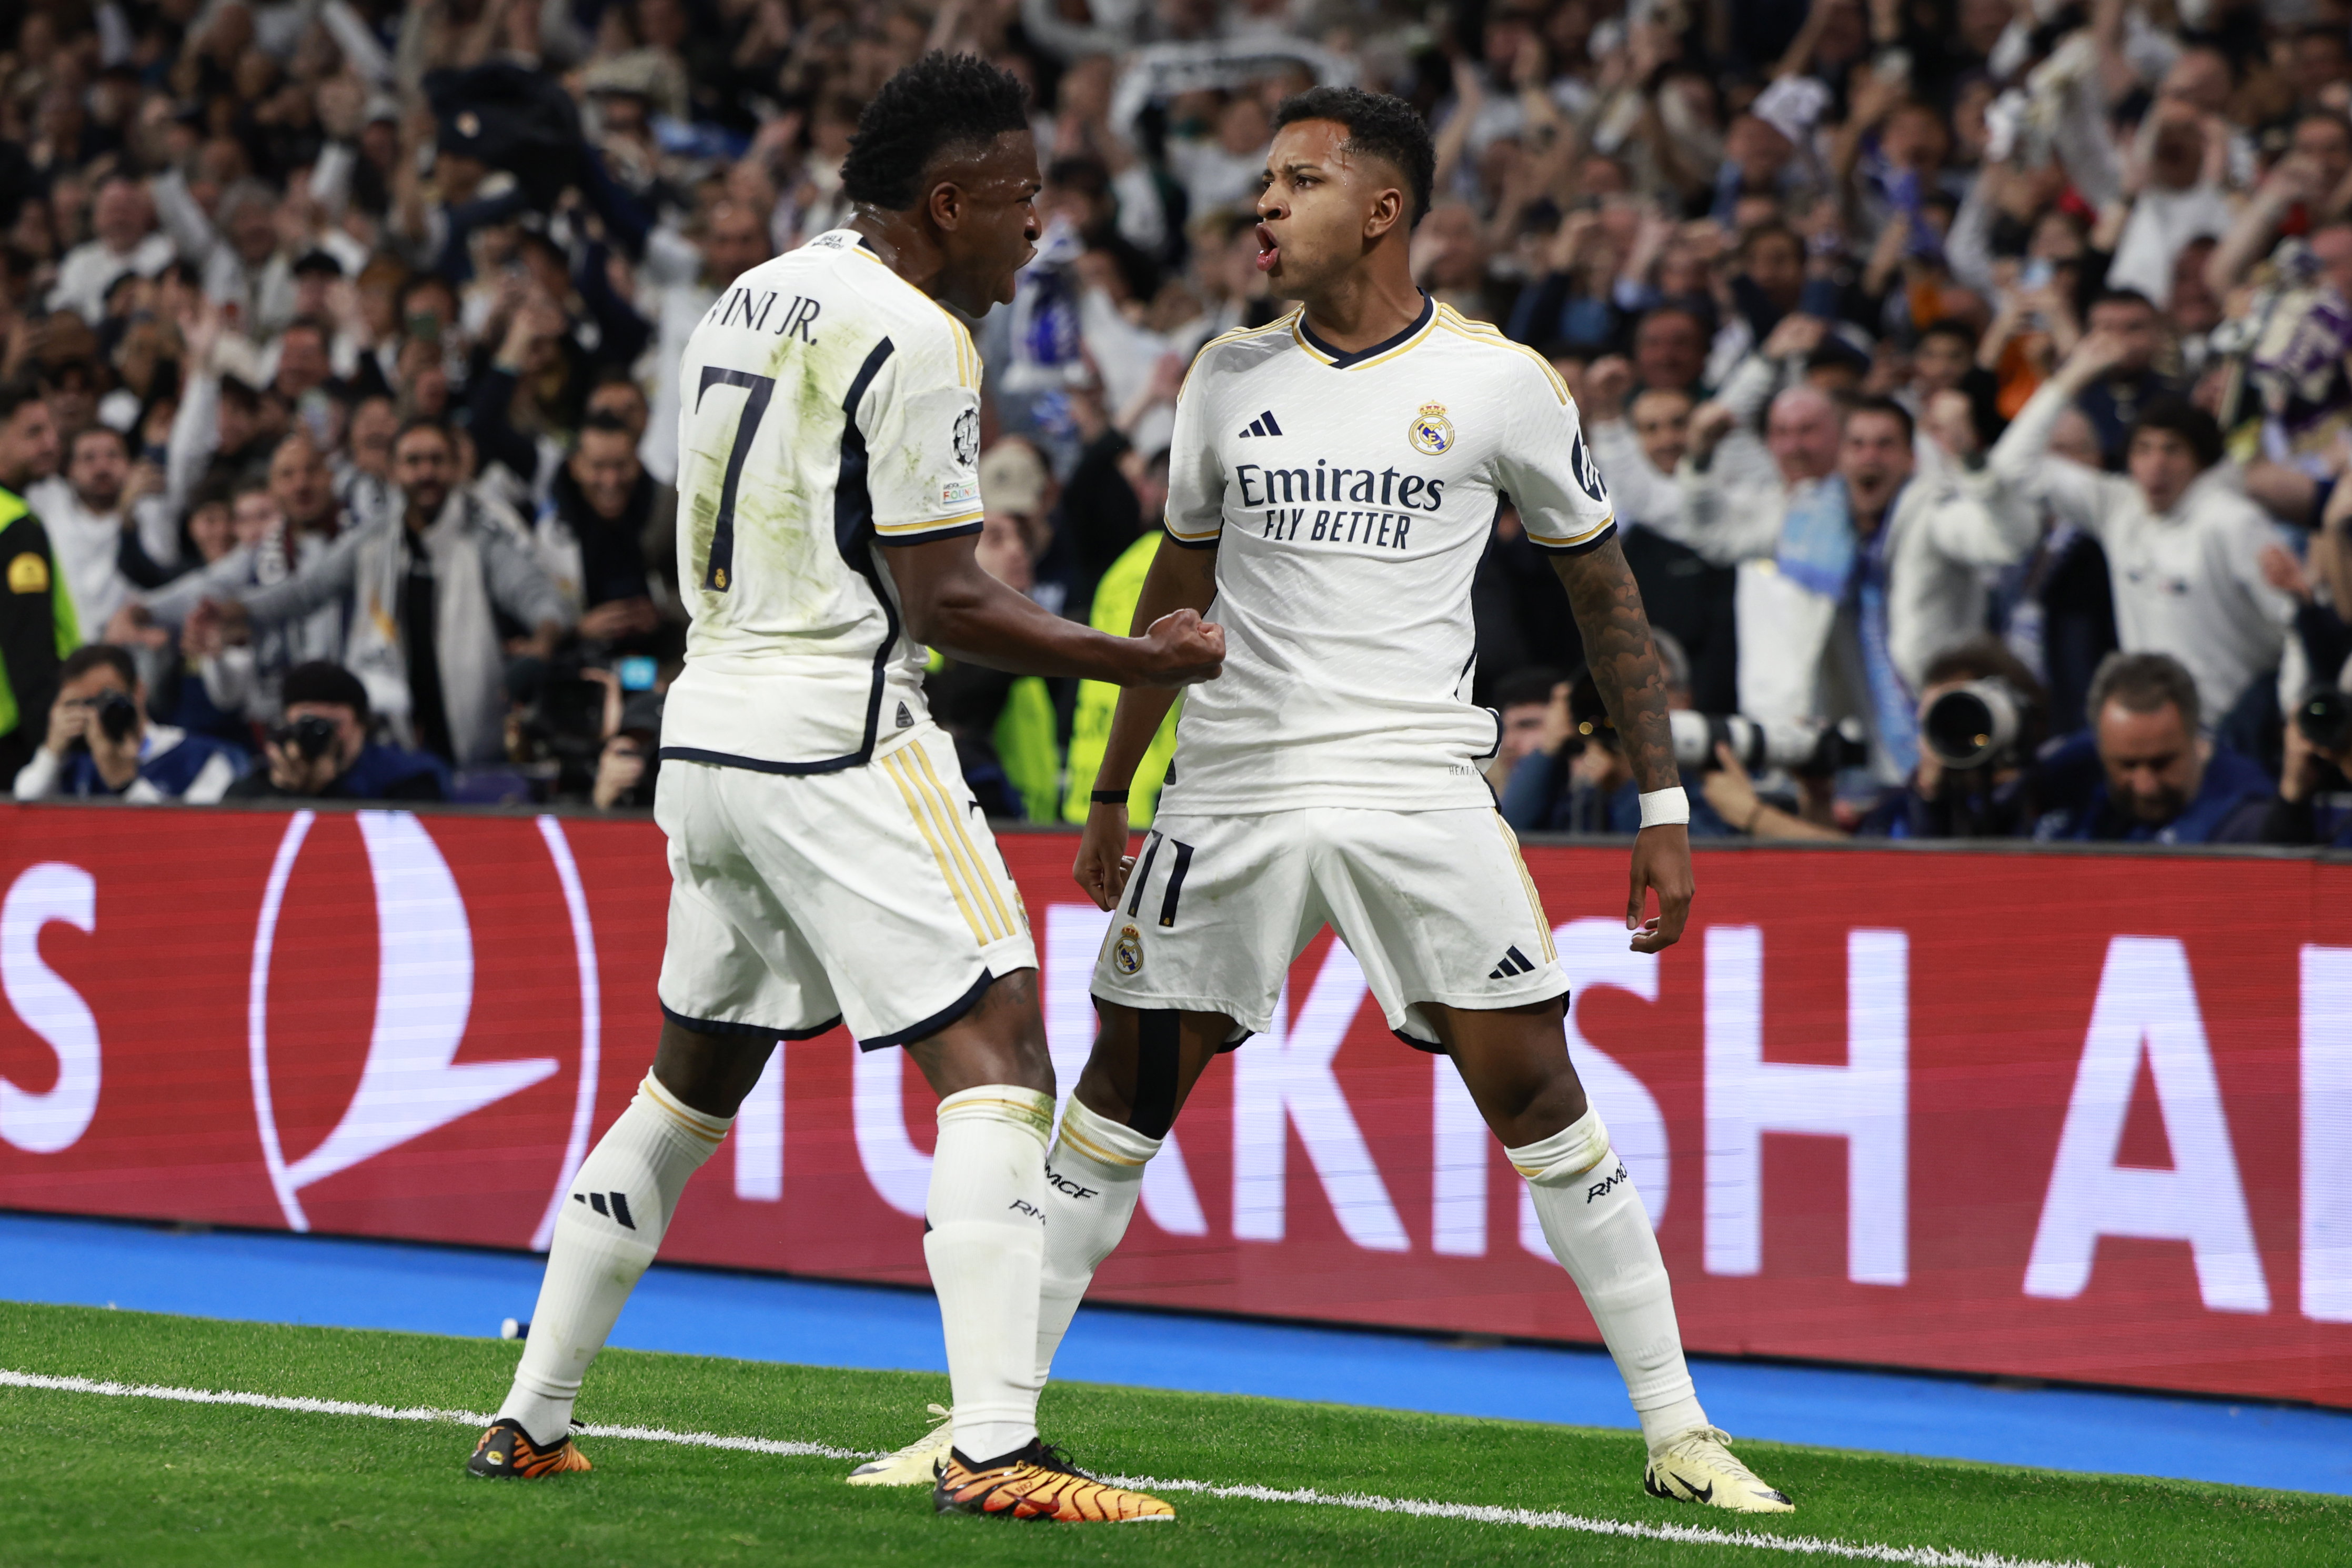 MADRID, SPAIN - APRIL 09: Rodrygo Goes of Real Madrid celebrates with his teammate Vinicius Junior after scoring his team's second goal during the UEFA Champions League quarter-final first leg match between Real Madrid CF and Manchester City at Estadio Santiago Bernabeu on April 09, 2024 in Madrid, Spain. (Photo by Antonio Villalba/Real Madrid via Getty Images)